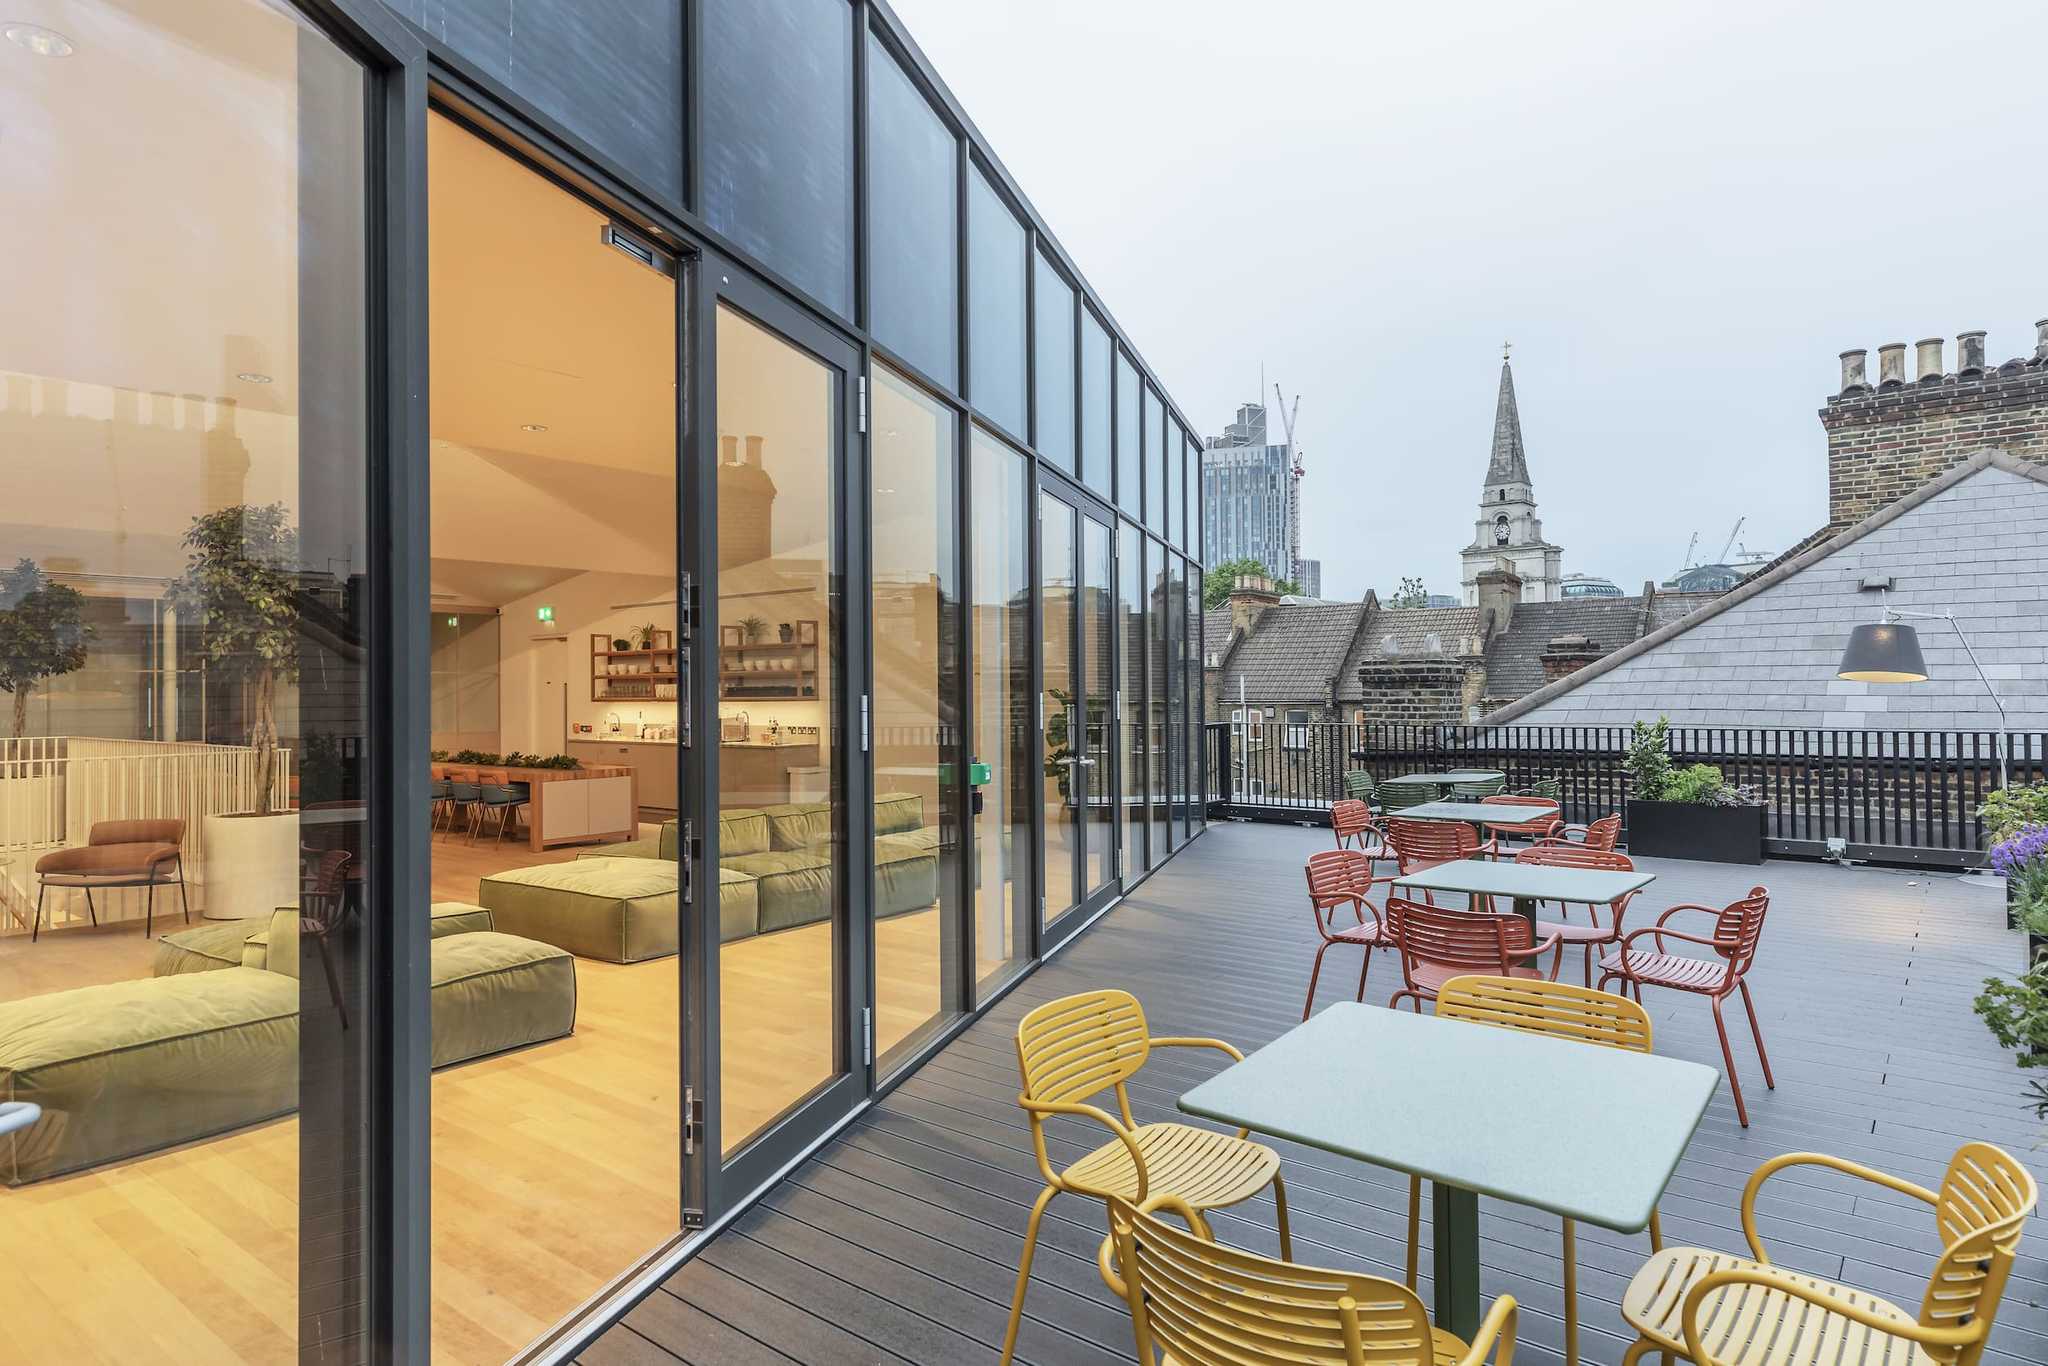 Brick Lane office space and roof terrace with views across East London.